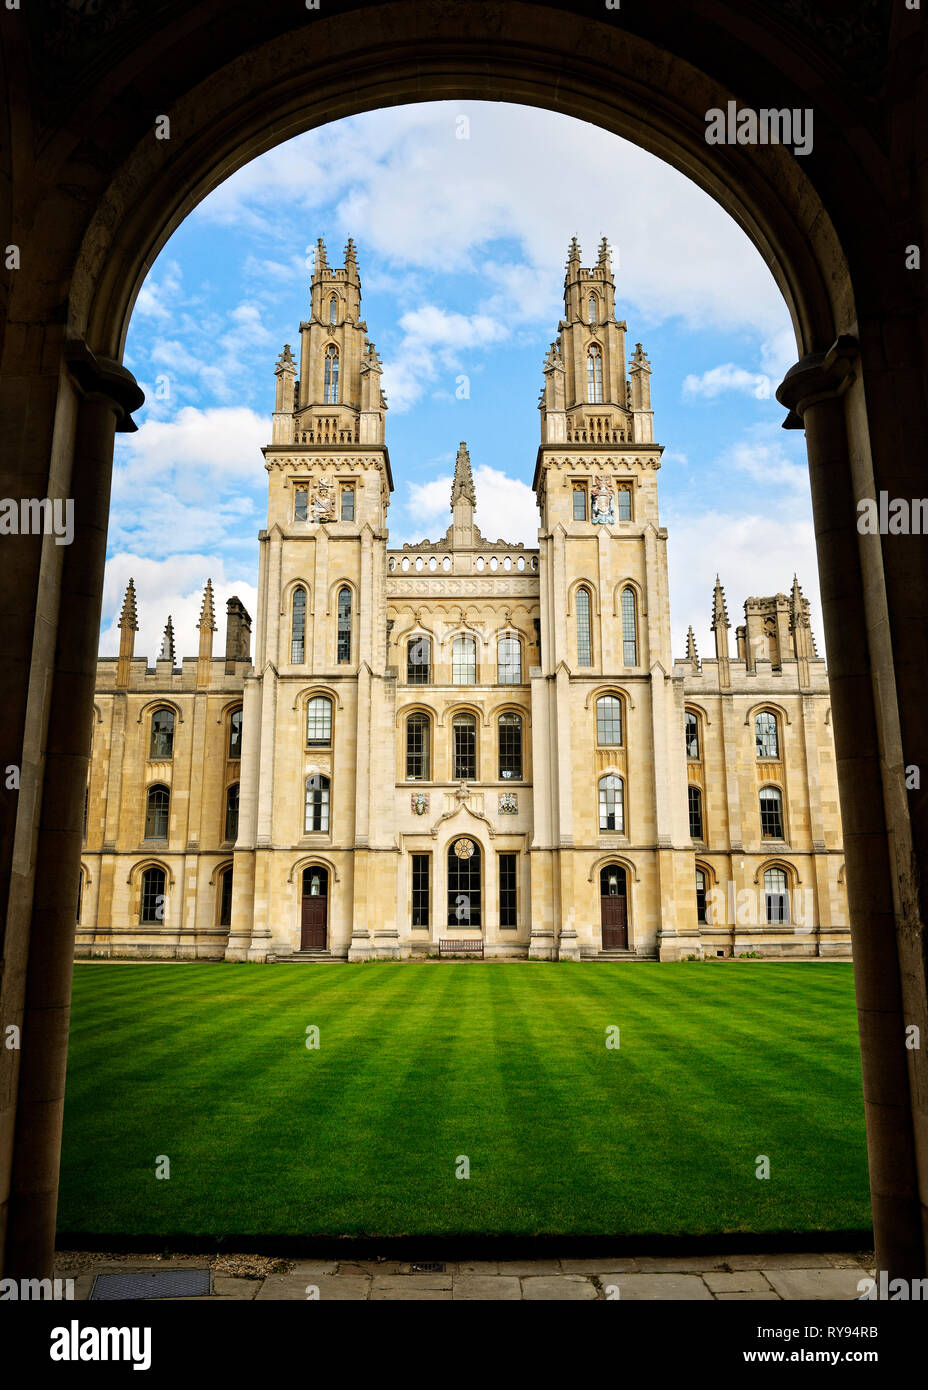 All Souls College, Oxford, Angleterre, Royaume-Uni Banque D'Images